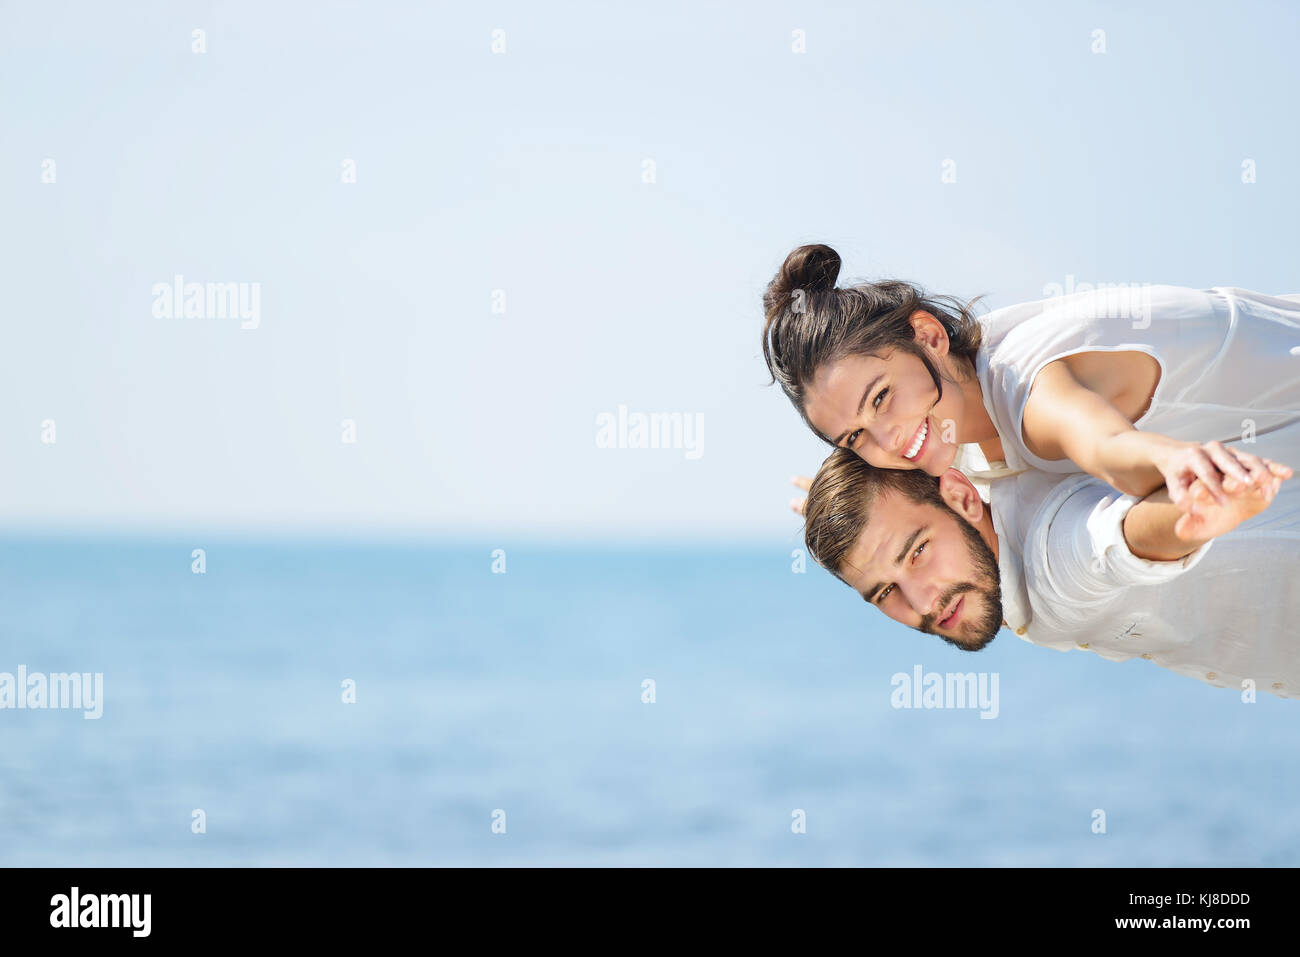 A picture of a happy couple having fun at the beach Stock Photo